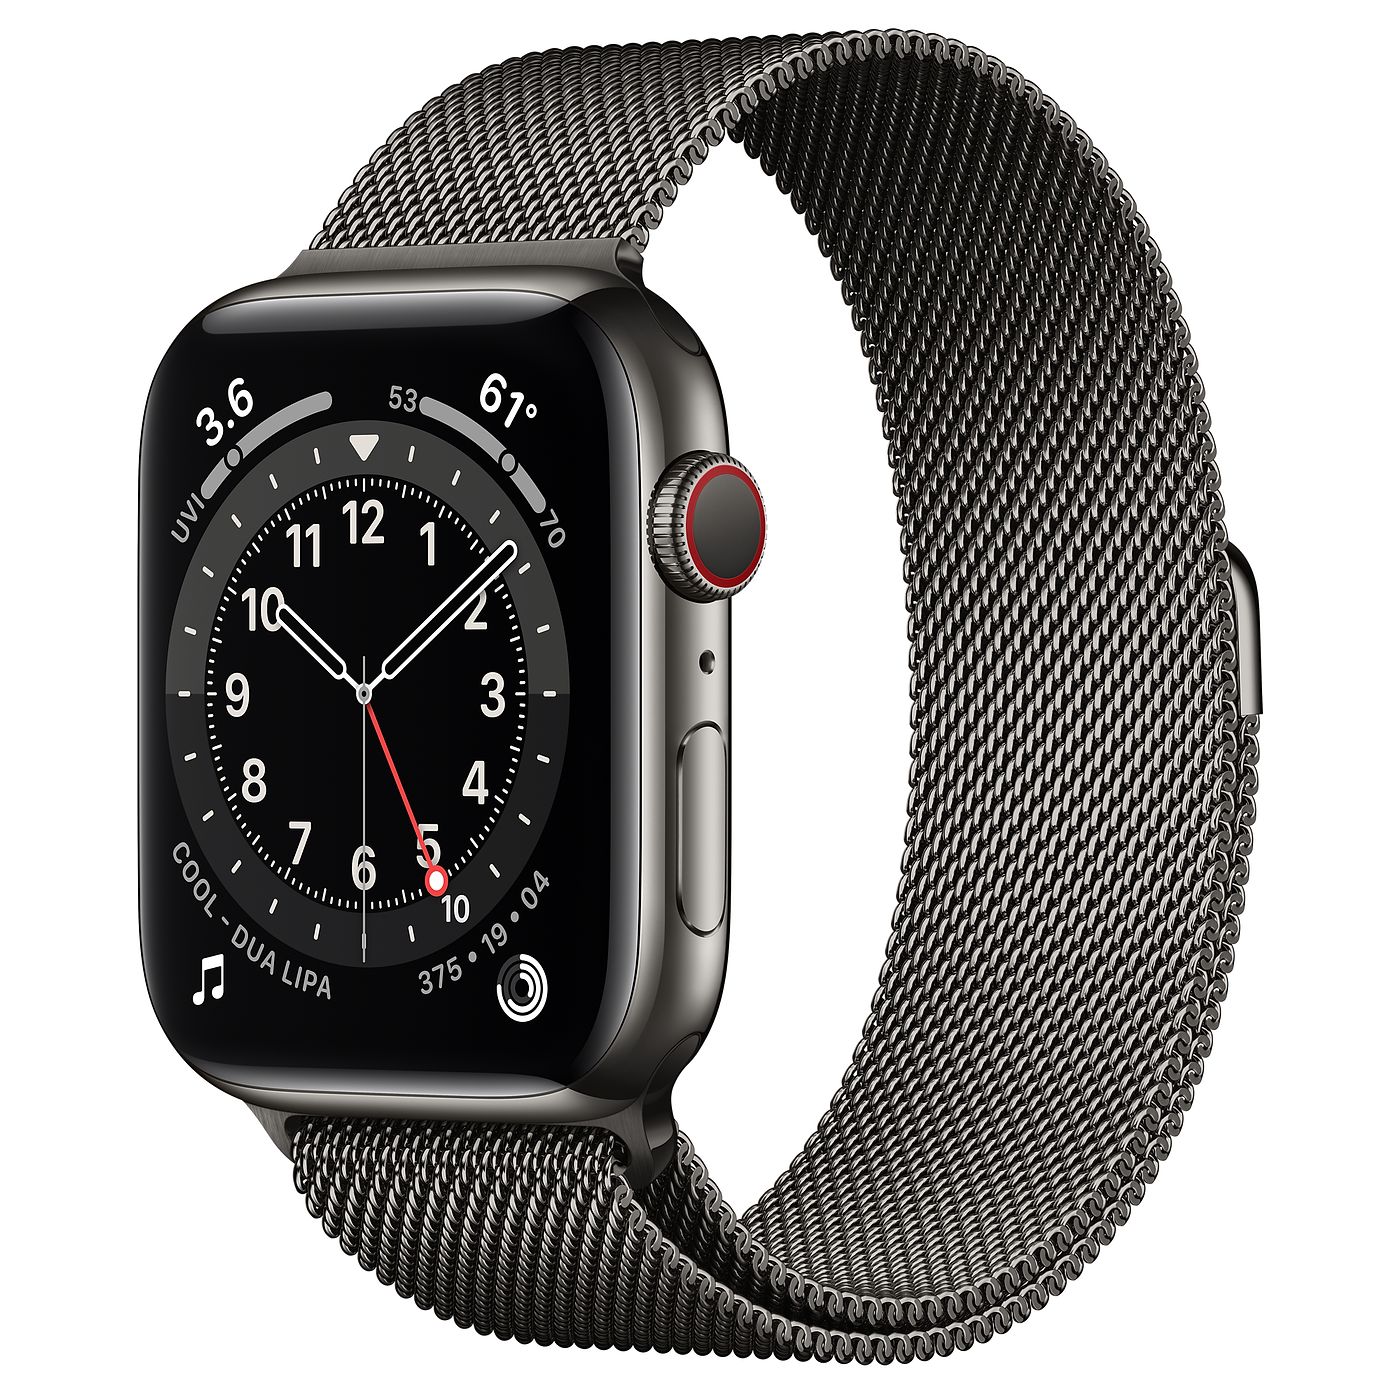 Apple Watch Series 6 GPS + Cellular 44mm Graphite Stainless Steel